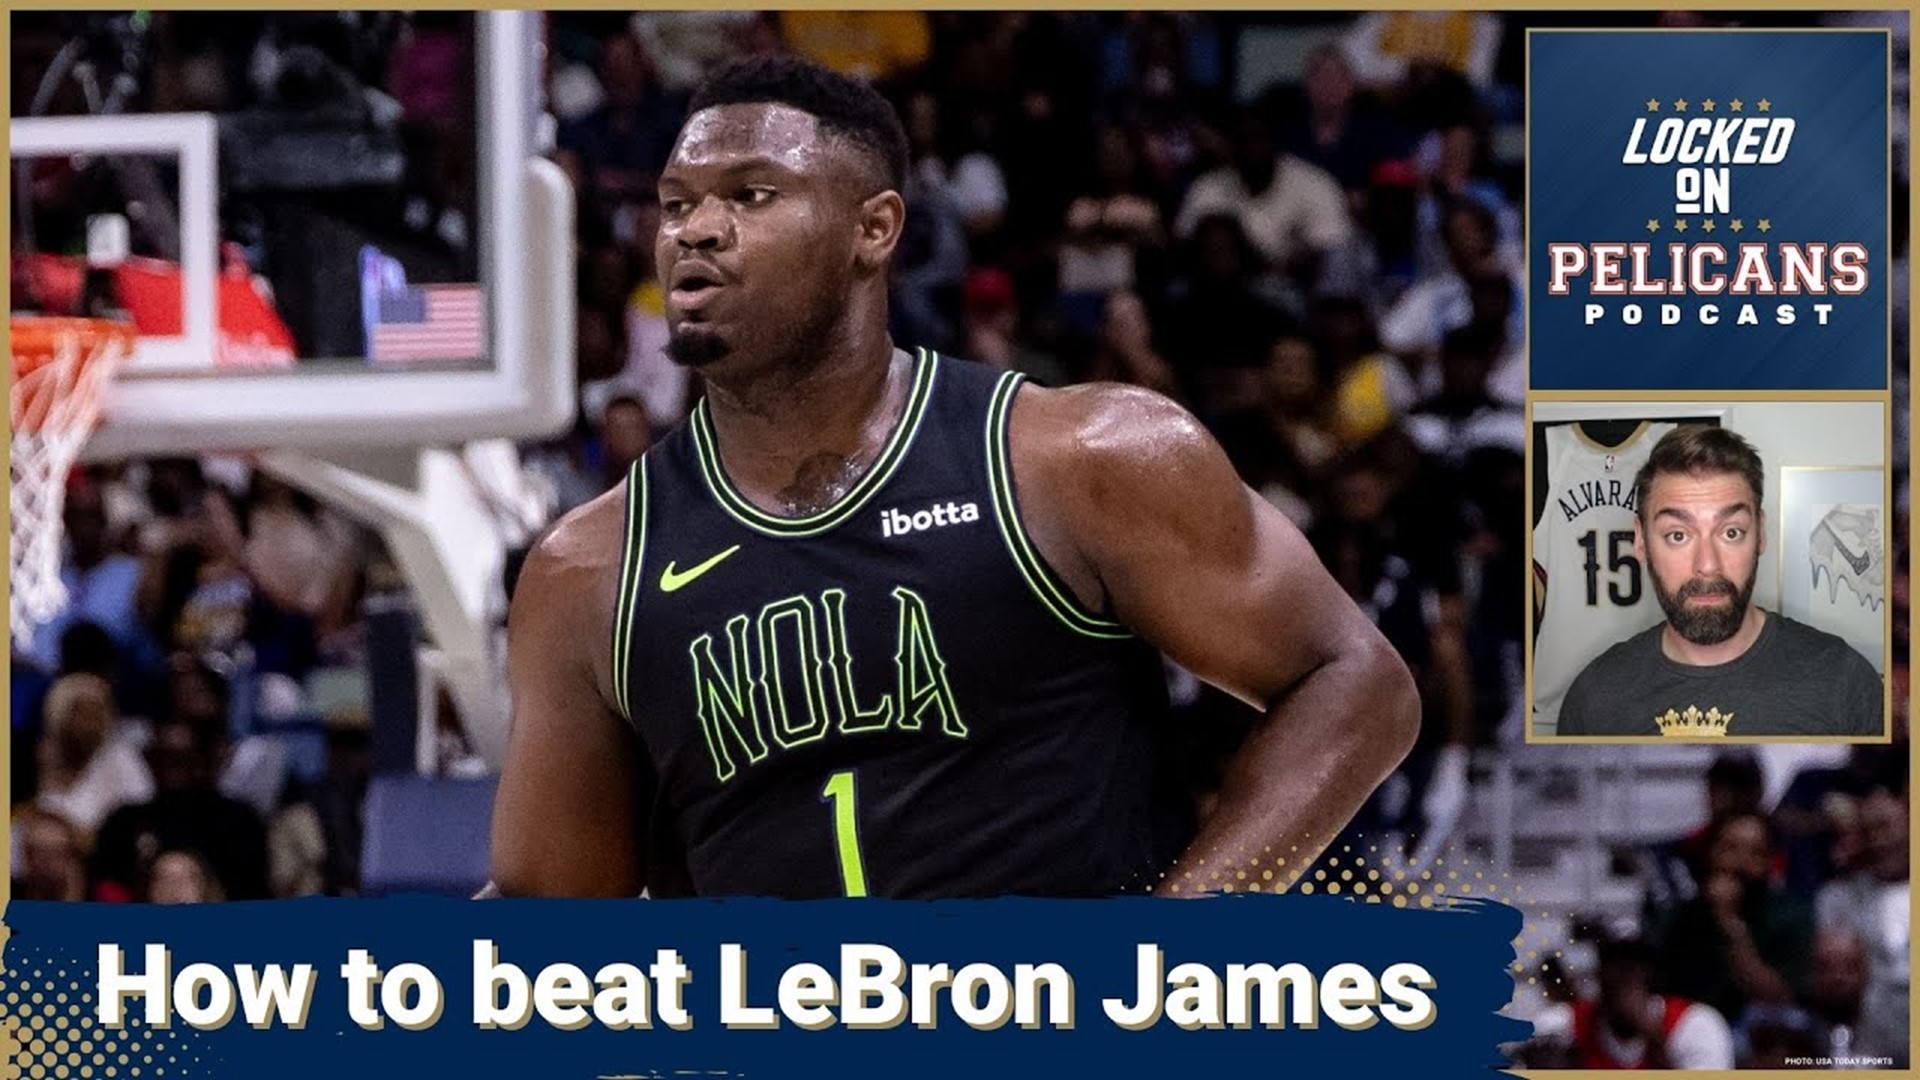 It's time for another game between the New Orleans Pelicans and the Los Angeles Lakers, and if the Pels want to avoid a repeat of Sunday, Lebron must be slowed down